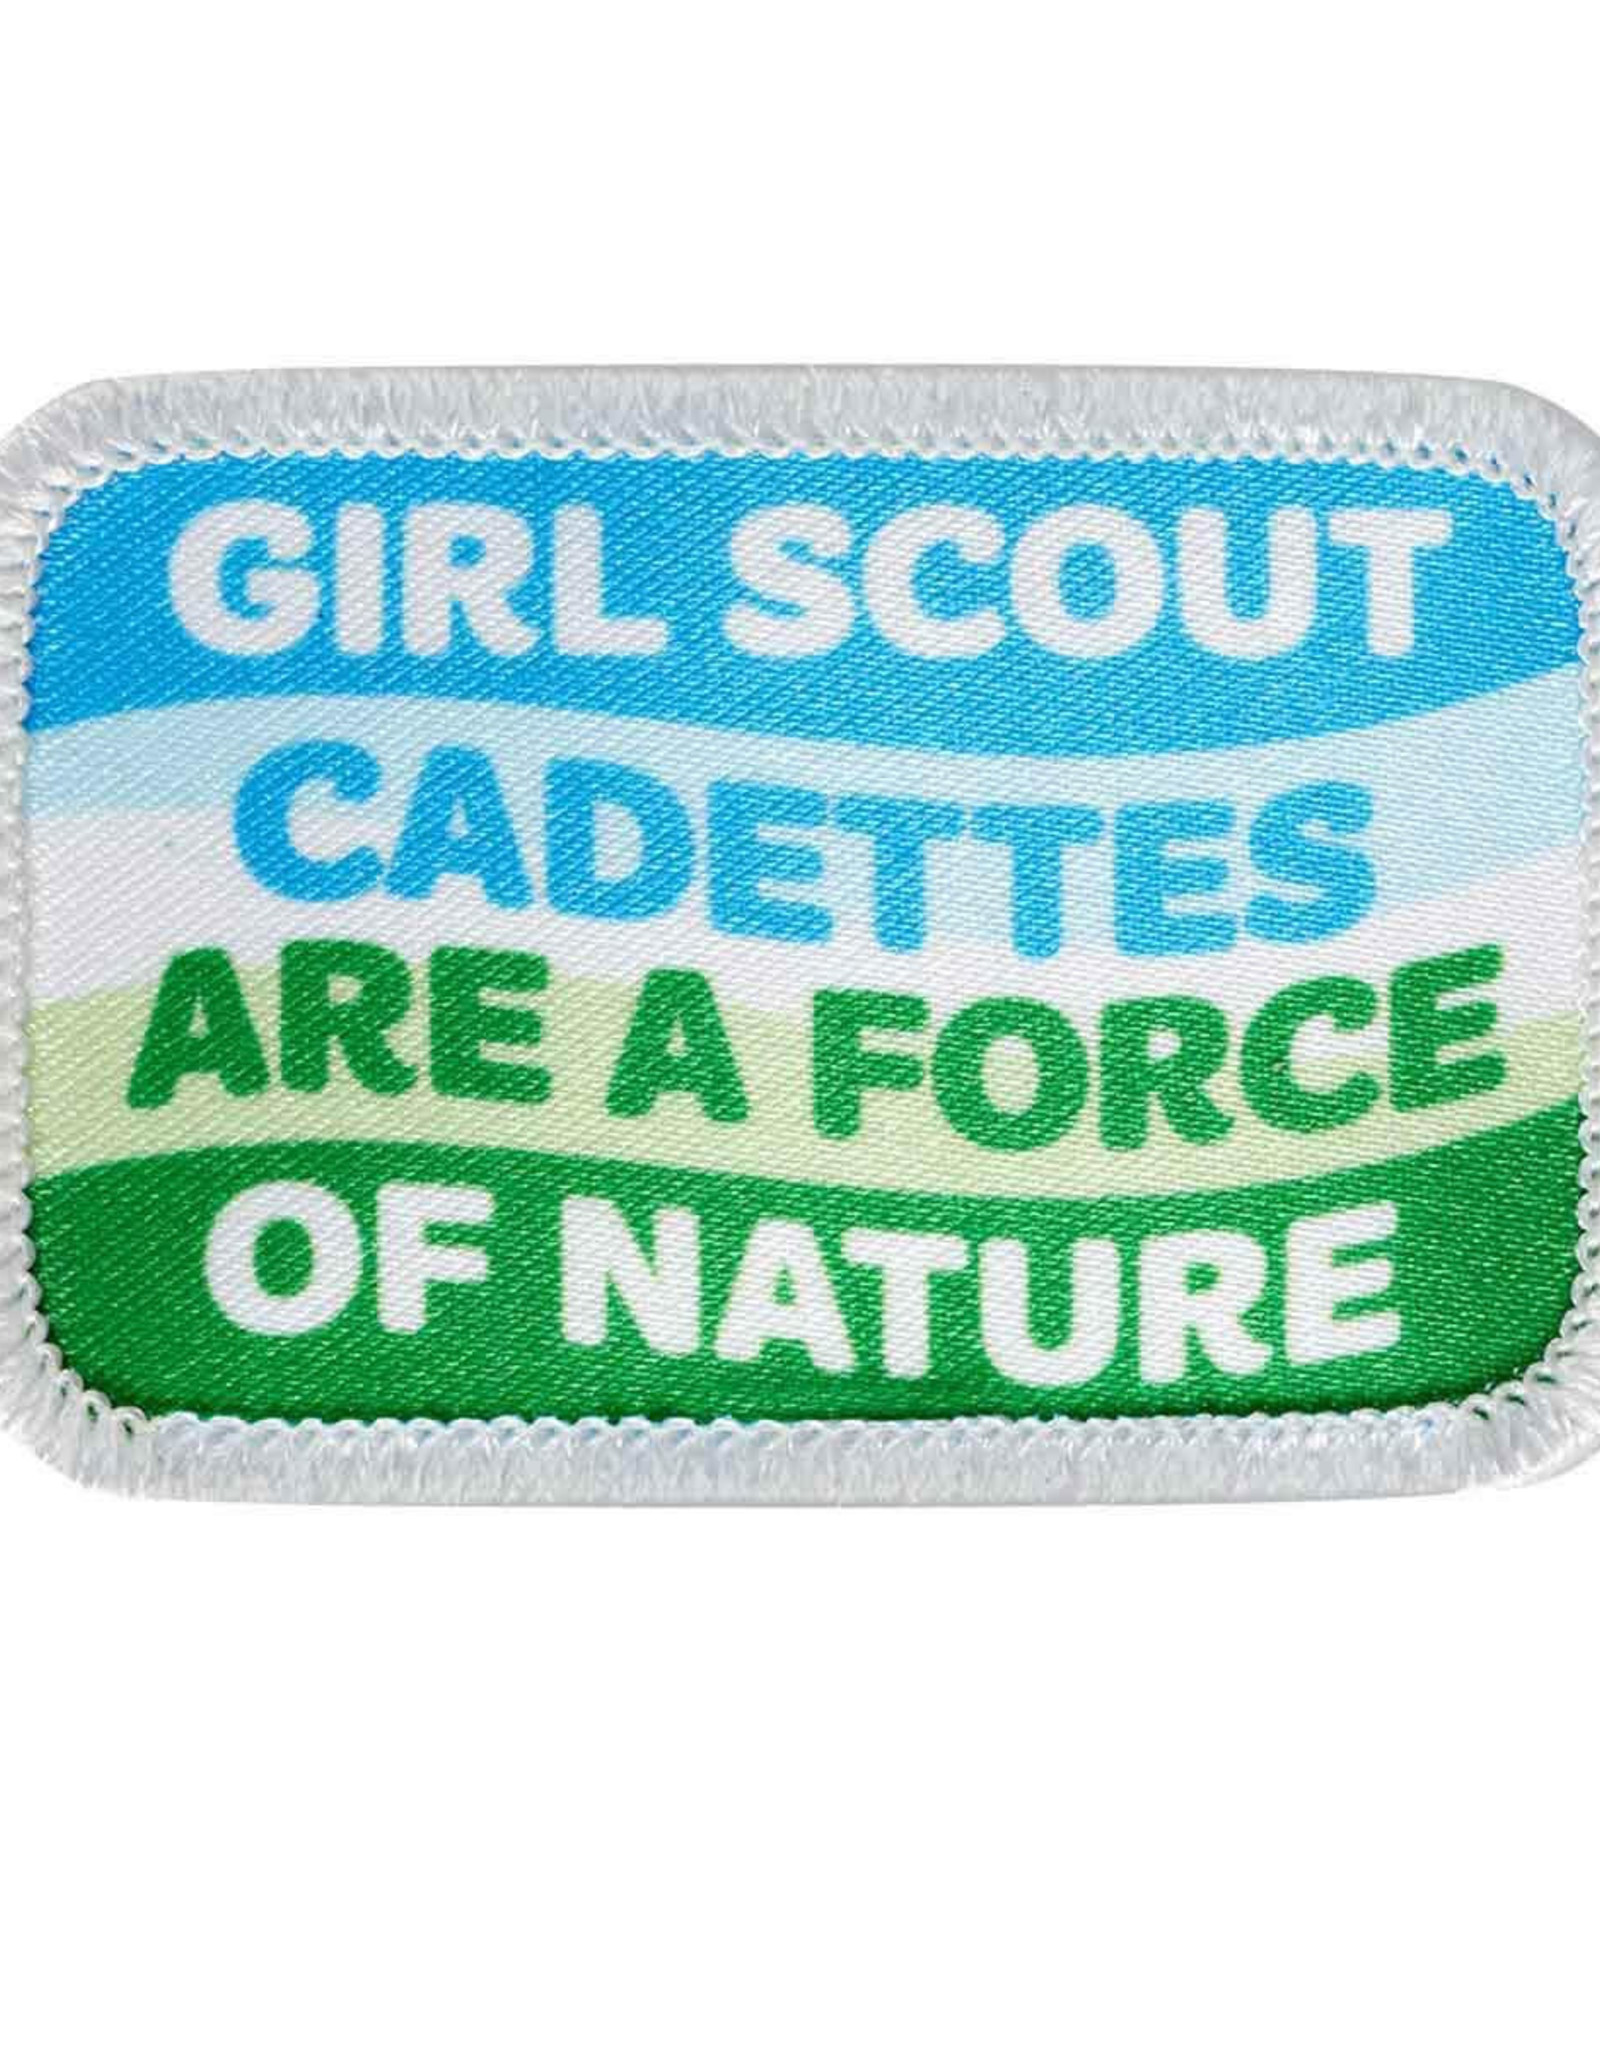 GSUSA Girl Scout Cadettes Are a Force of Nature